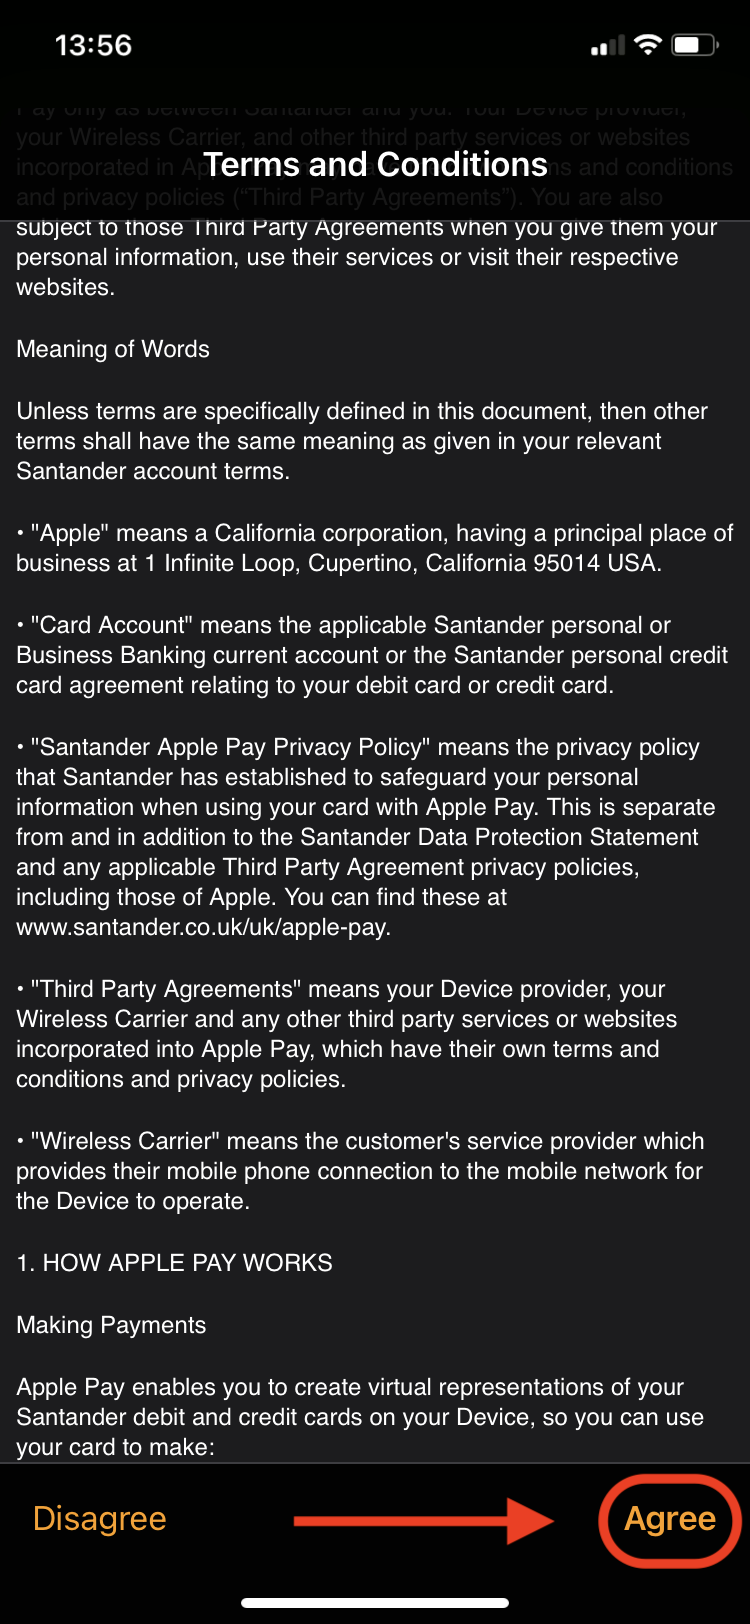 How to use Apple Pay on Apple Watch - terms and conditions